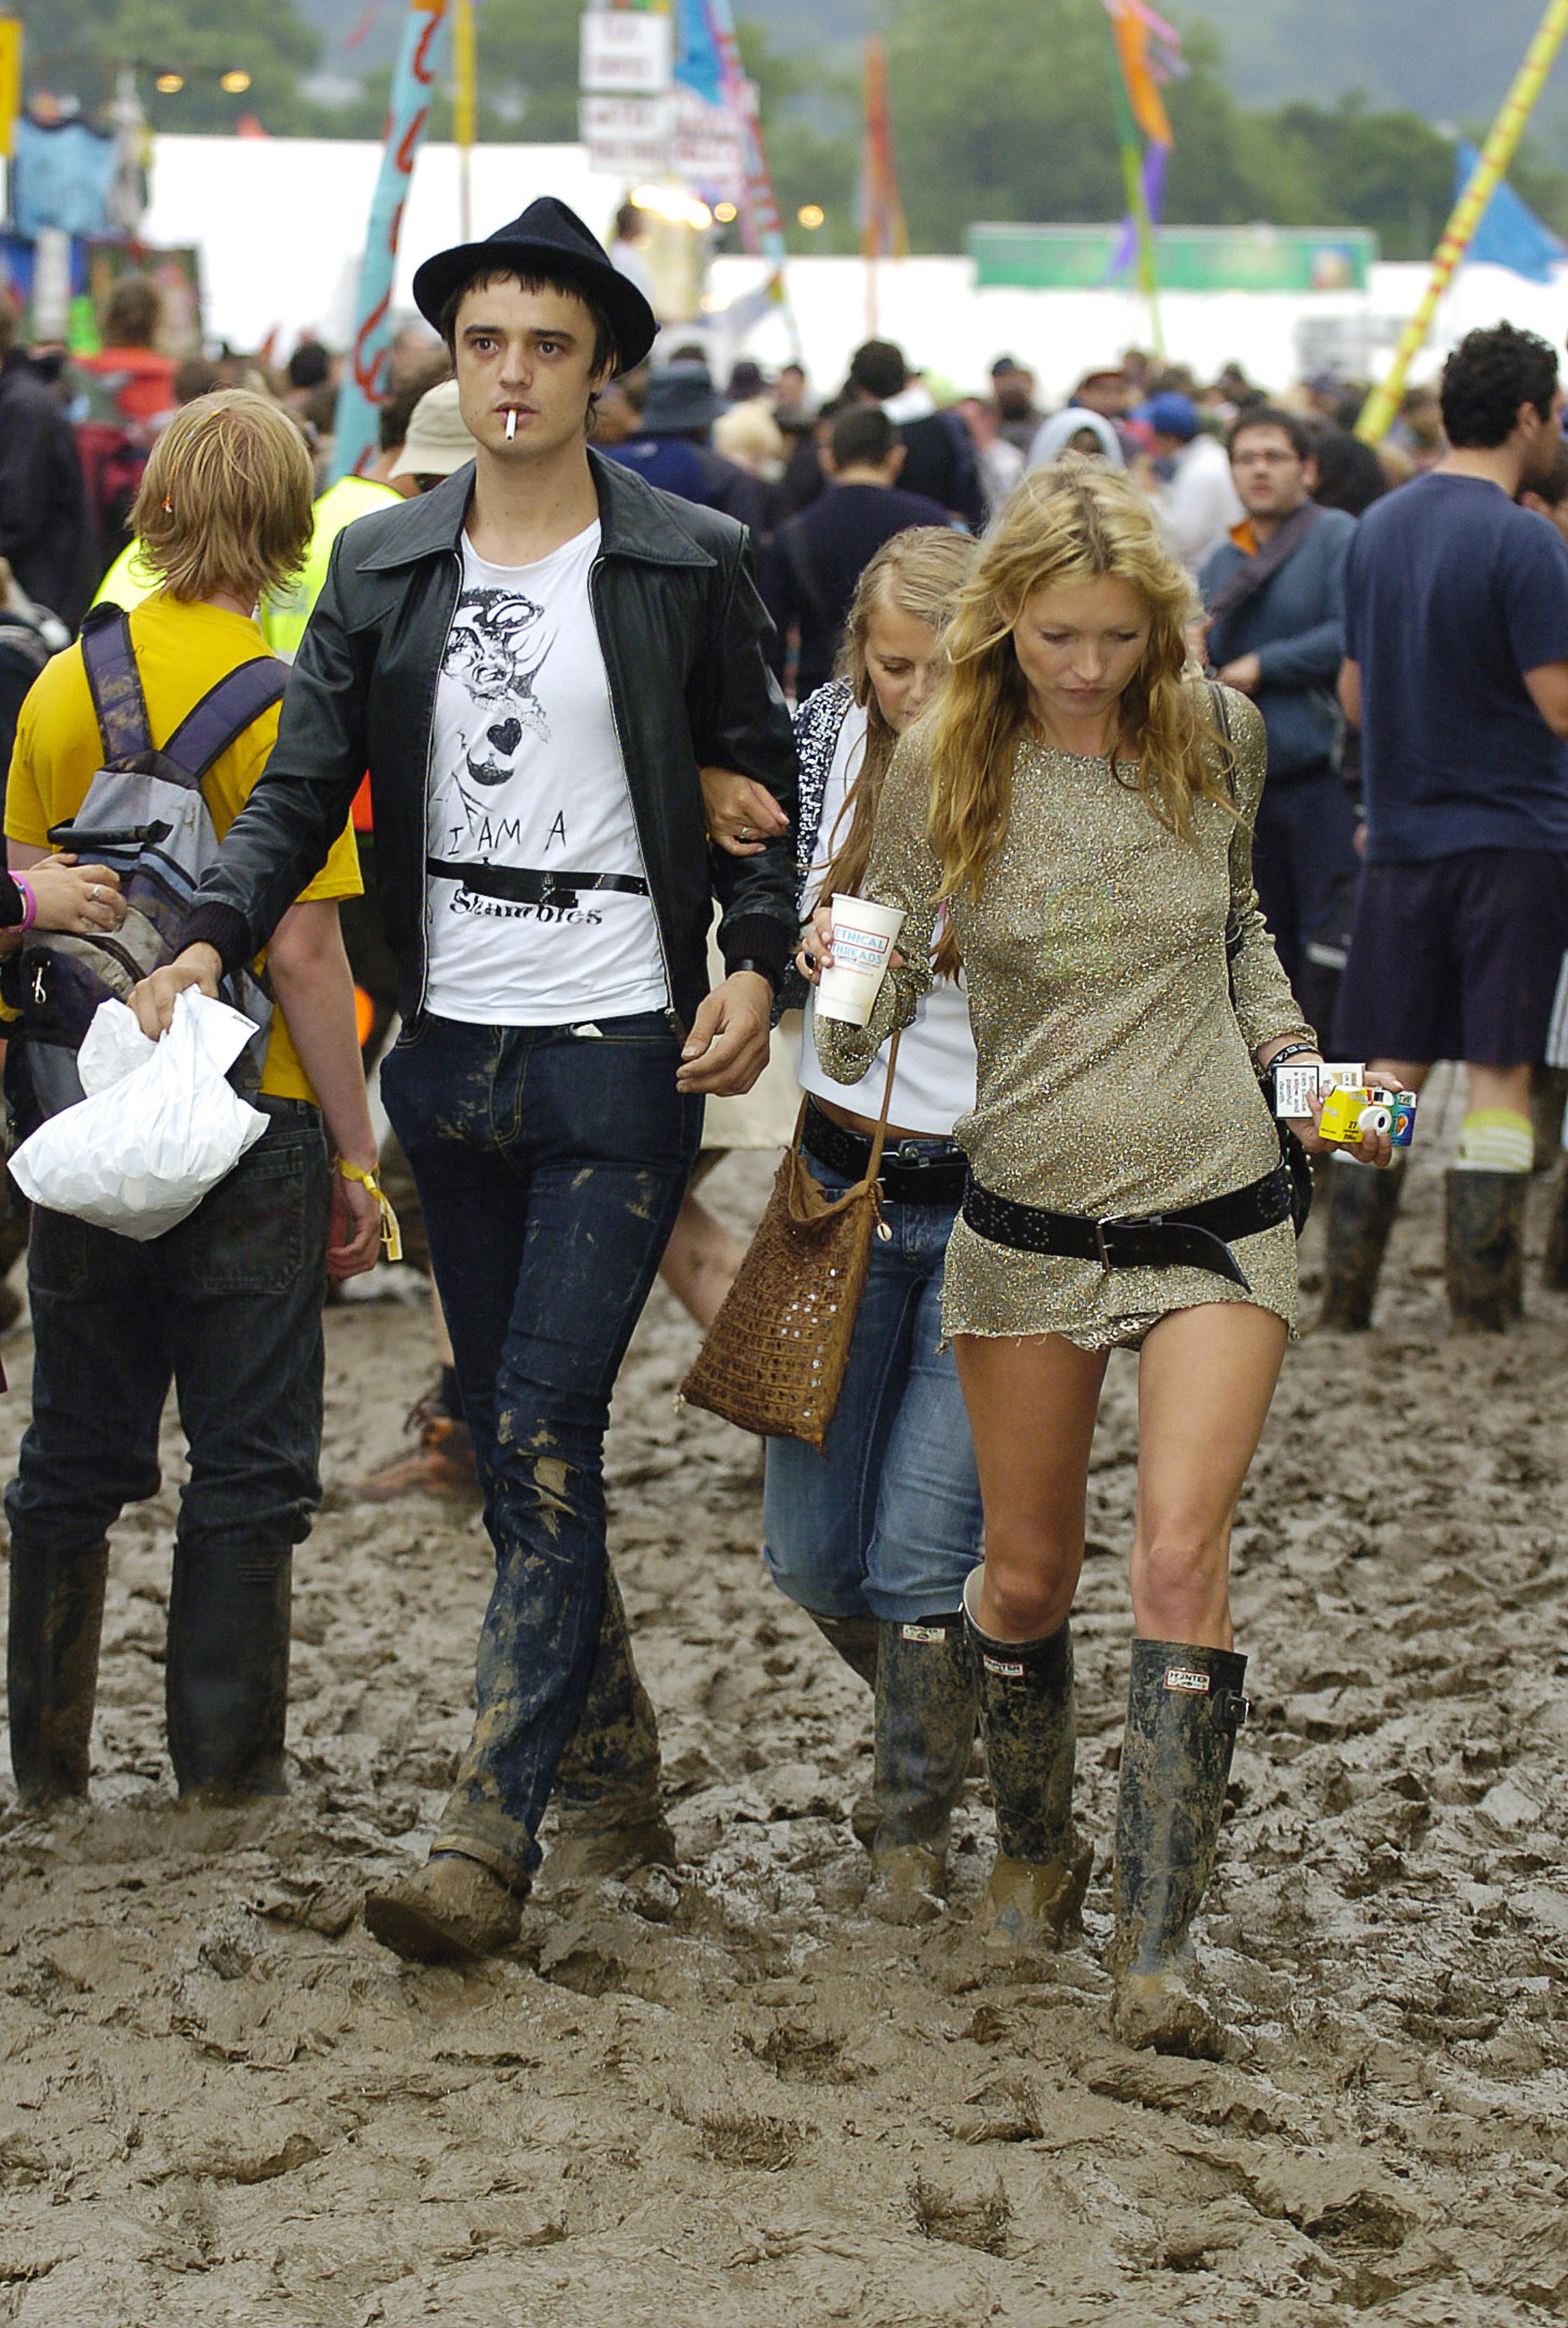 Kate Moss' rain boots at Glastonbury: A fashion moment to remember CNN Style